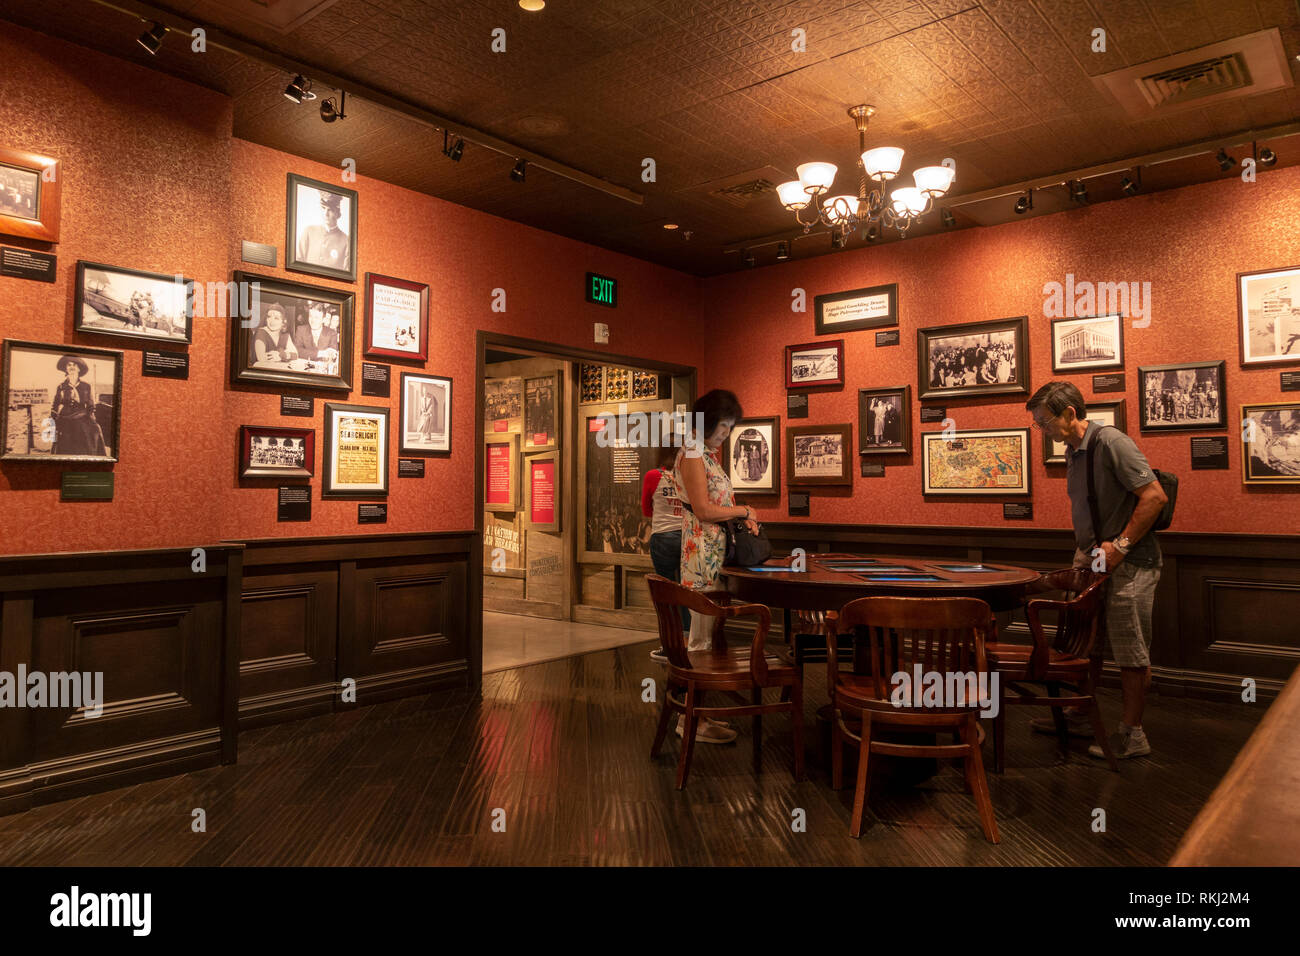 General view of the bar area in The Mob Museum, Las Vegas (City of Las Vegas), Nevada, United States. Stock Photo